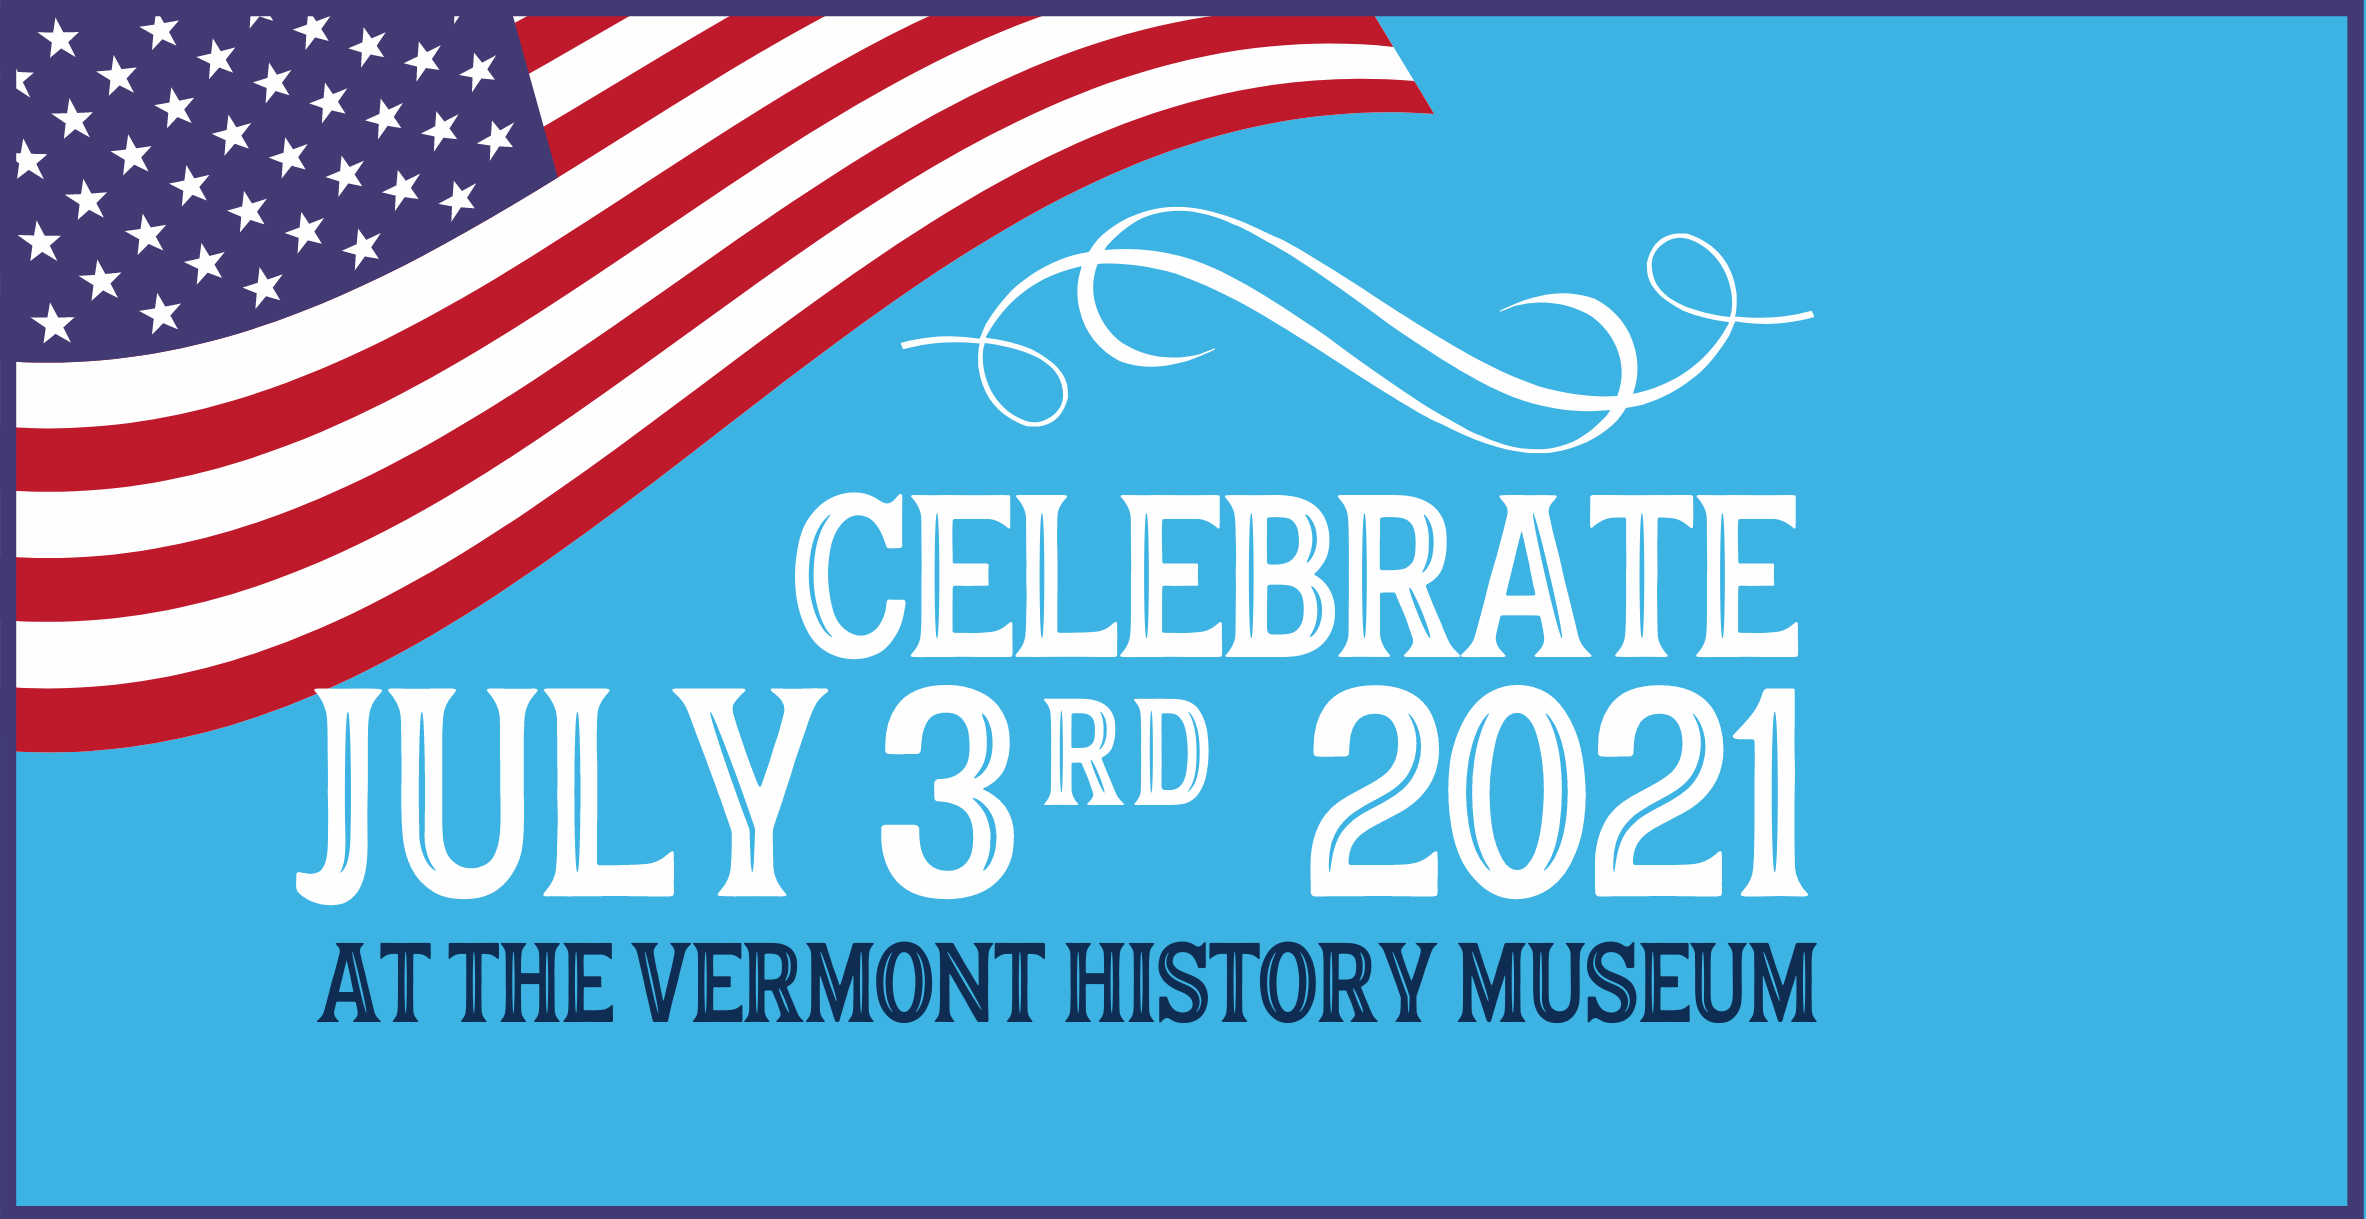 Celebrate July 3rd at the Vermont History Museum